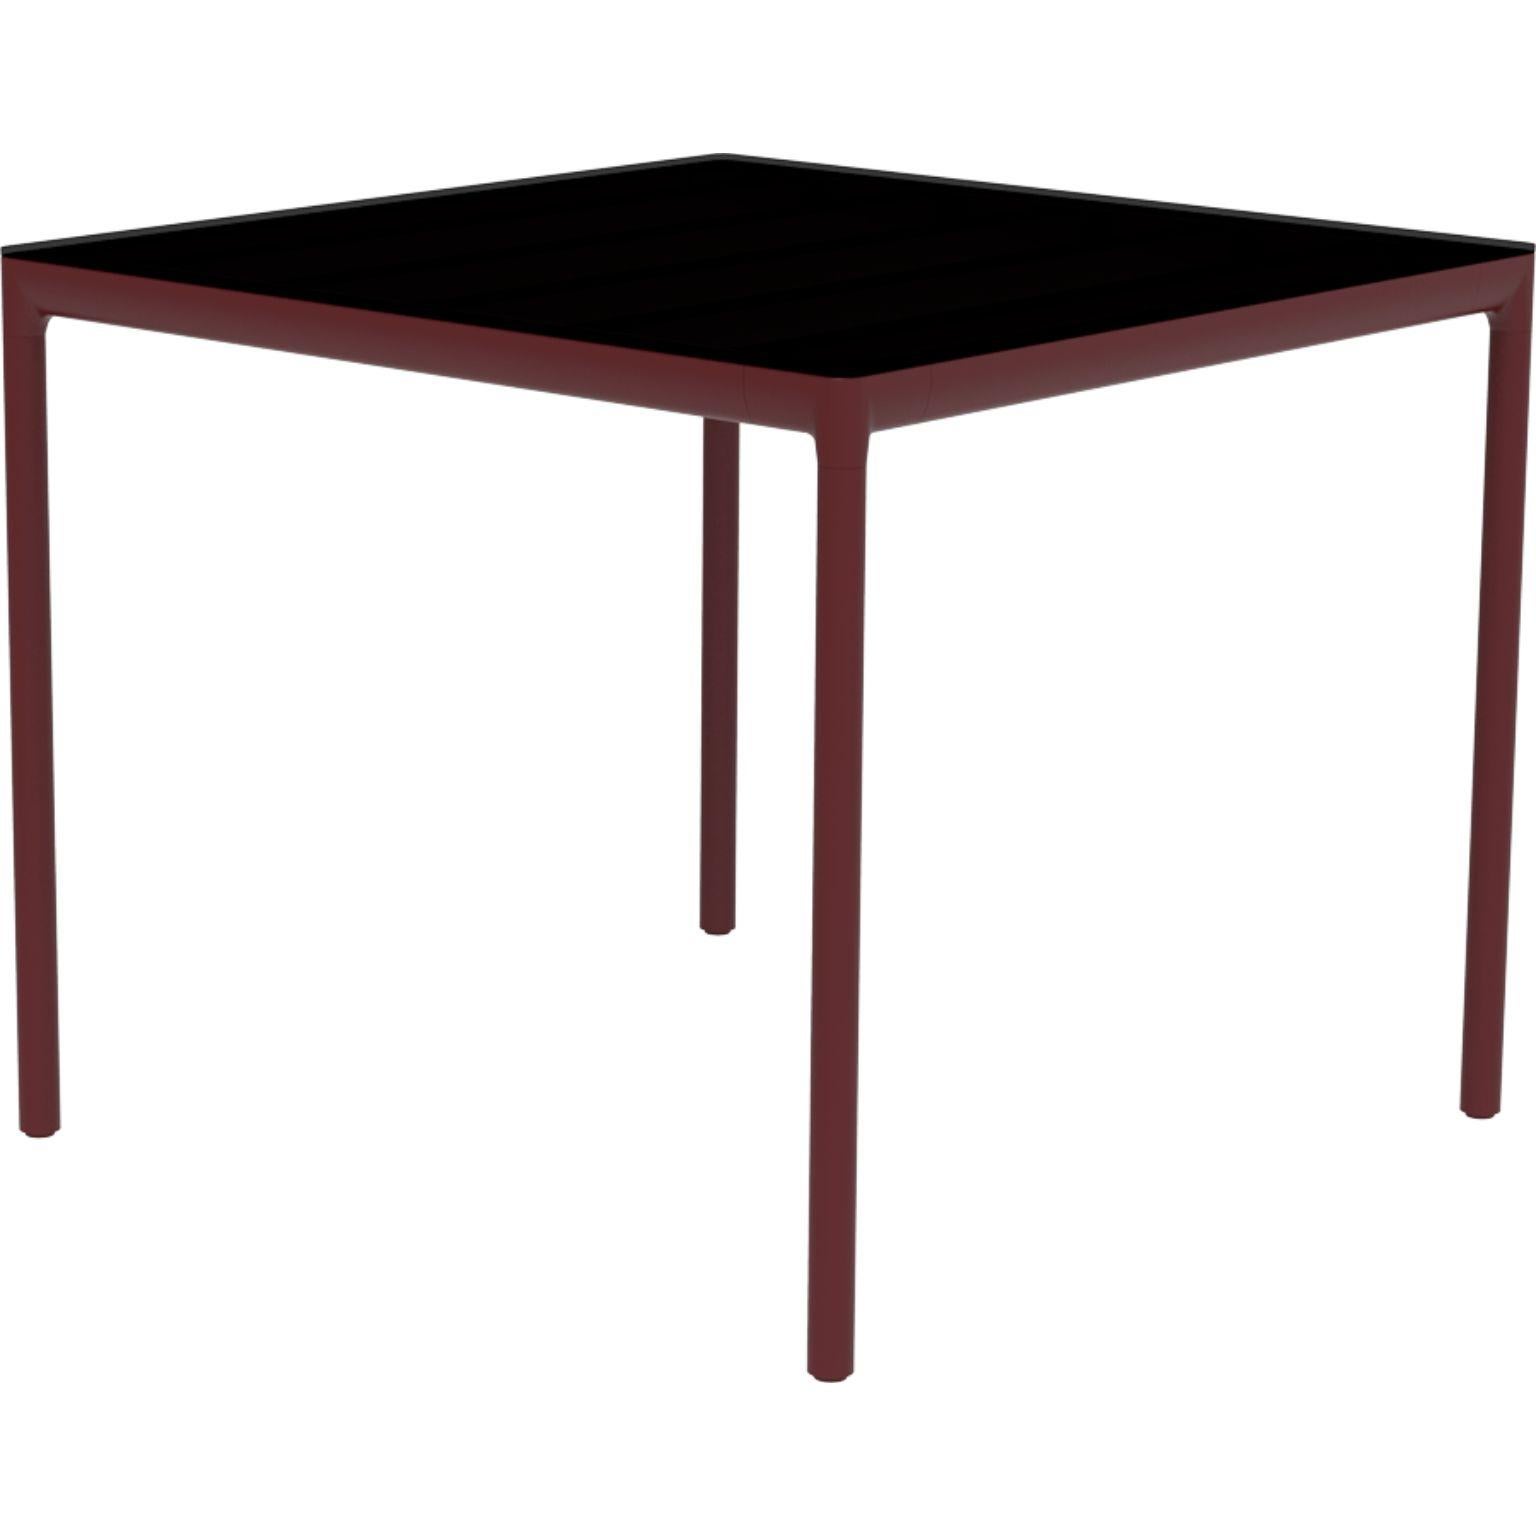 Ribbons Burgundy 90 table by MOWEE
Dimensions: D90 x W90 x H75 cm.
Material: Aluminium and HPL top.
Weight: 16 kg.
Also available in different colors and finishes. (HPL Black Edge or Neolith top).

An unmistakable collection for its beauty and